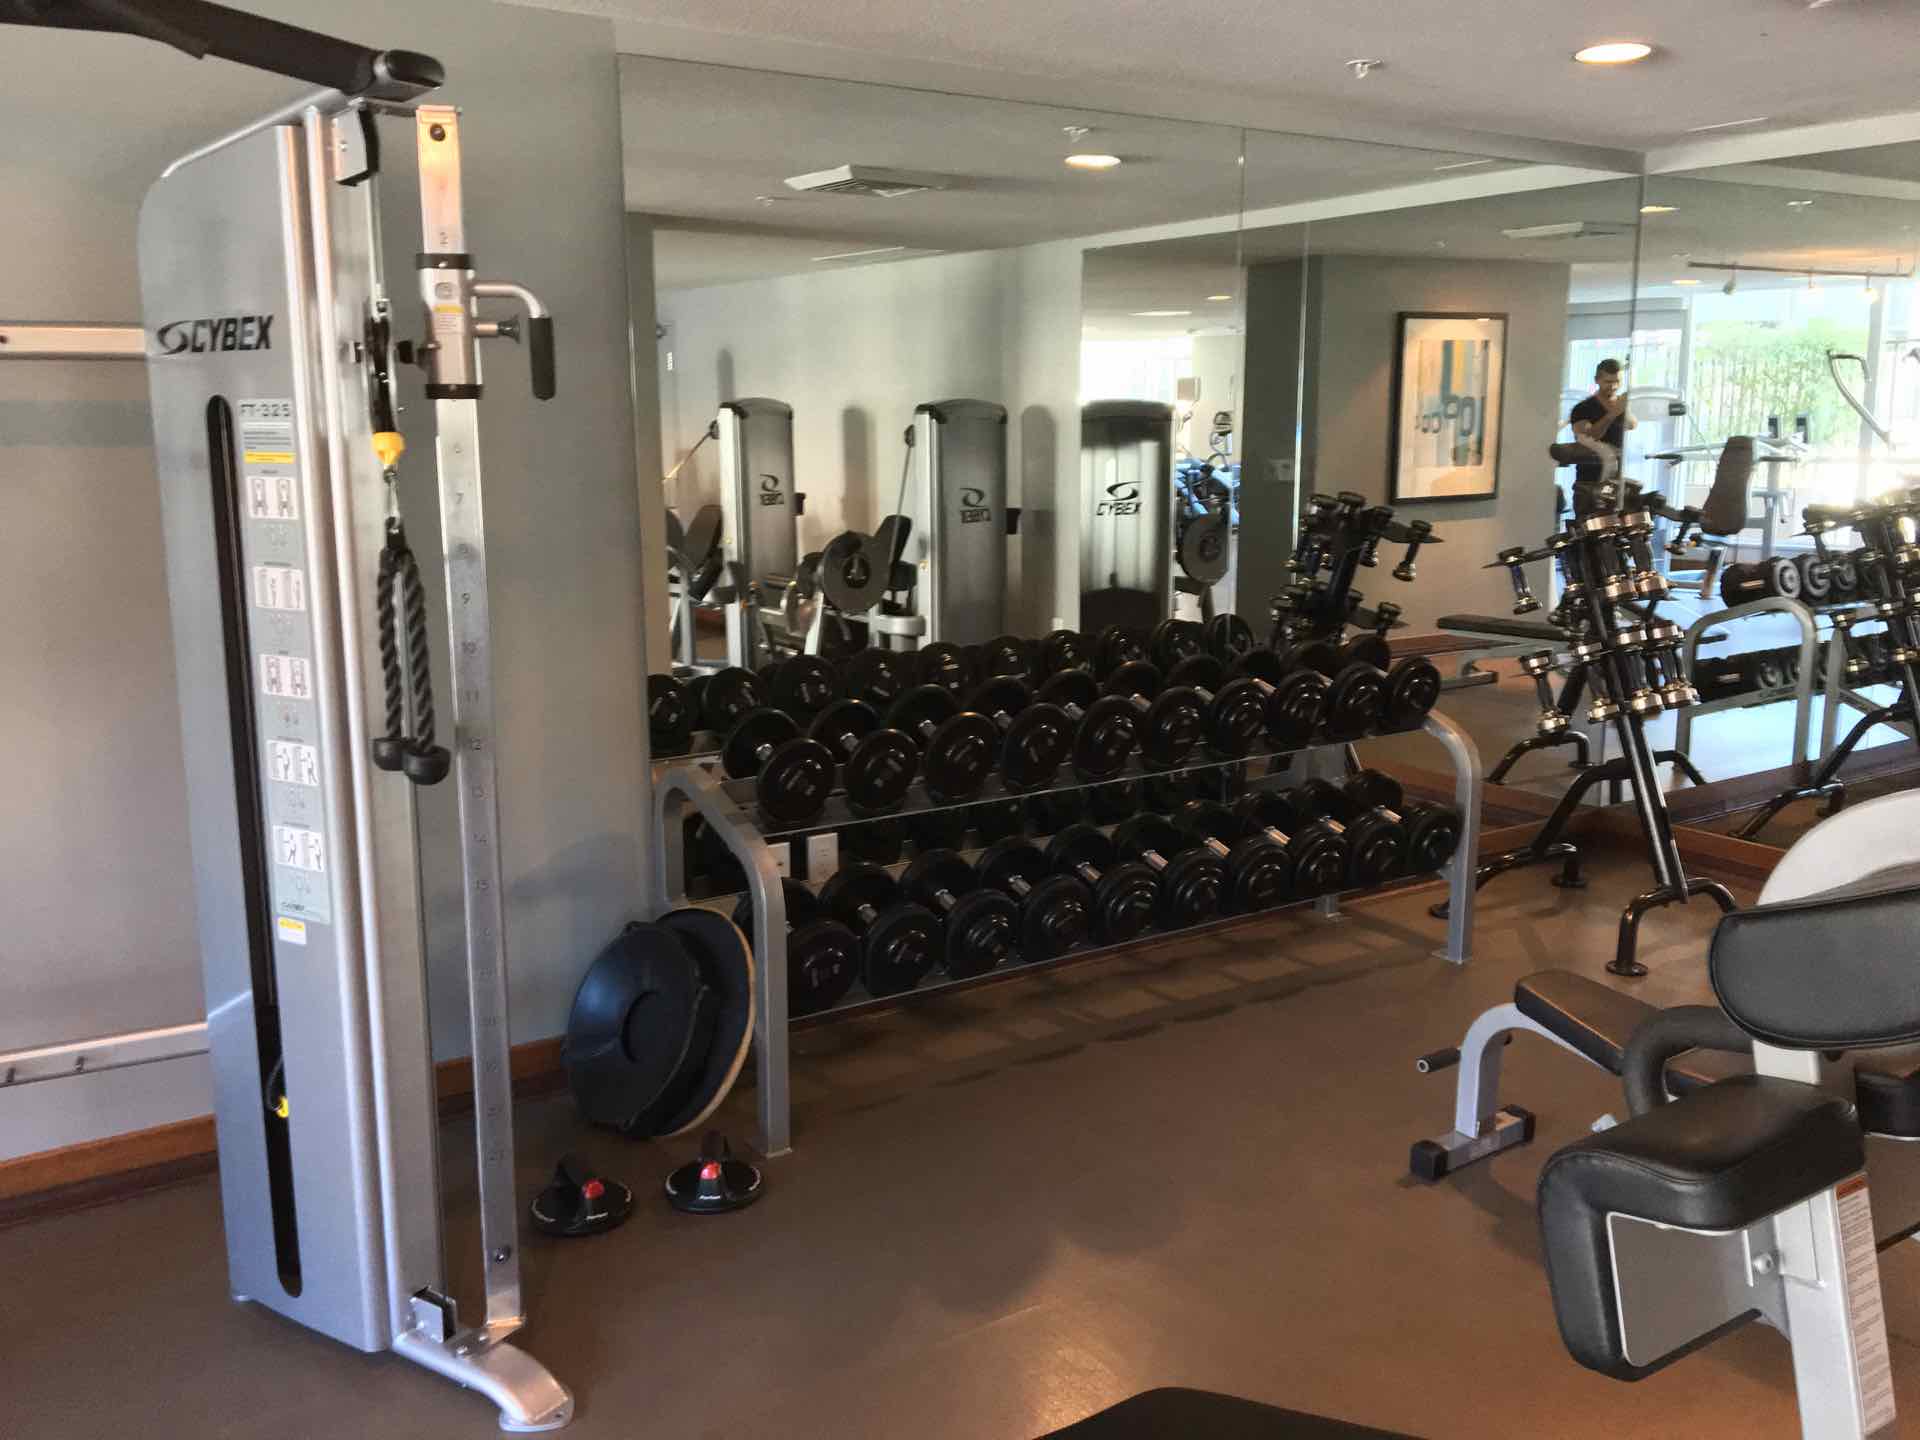 Free weights inside gym of downtown San Diego high rise condo tower